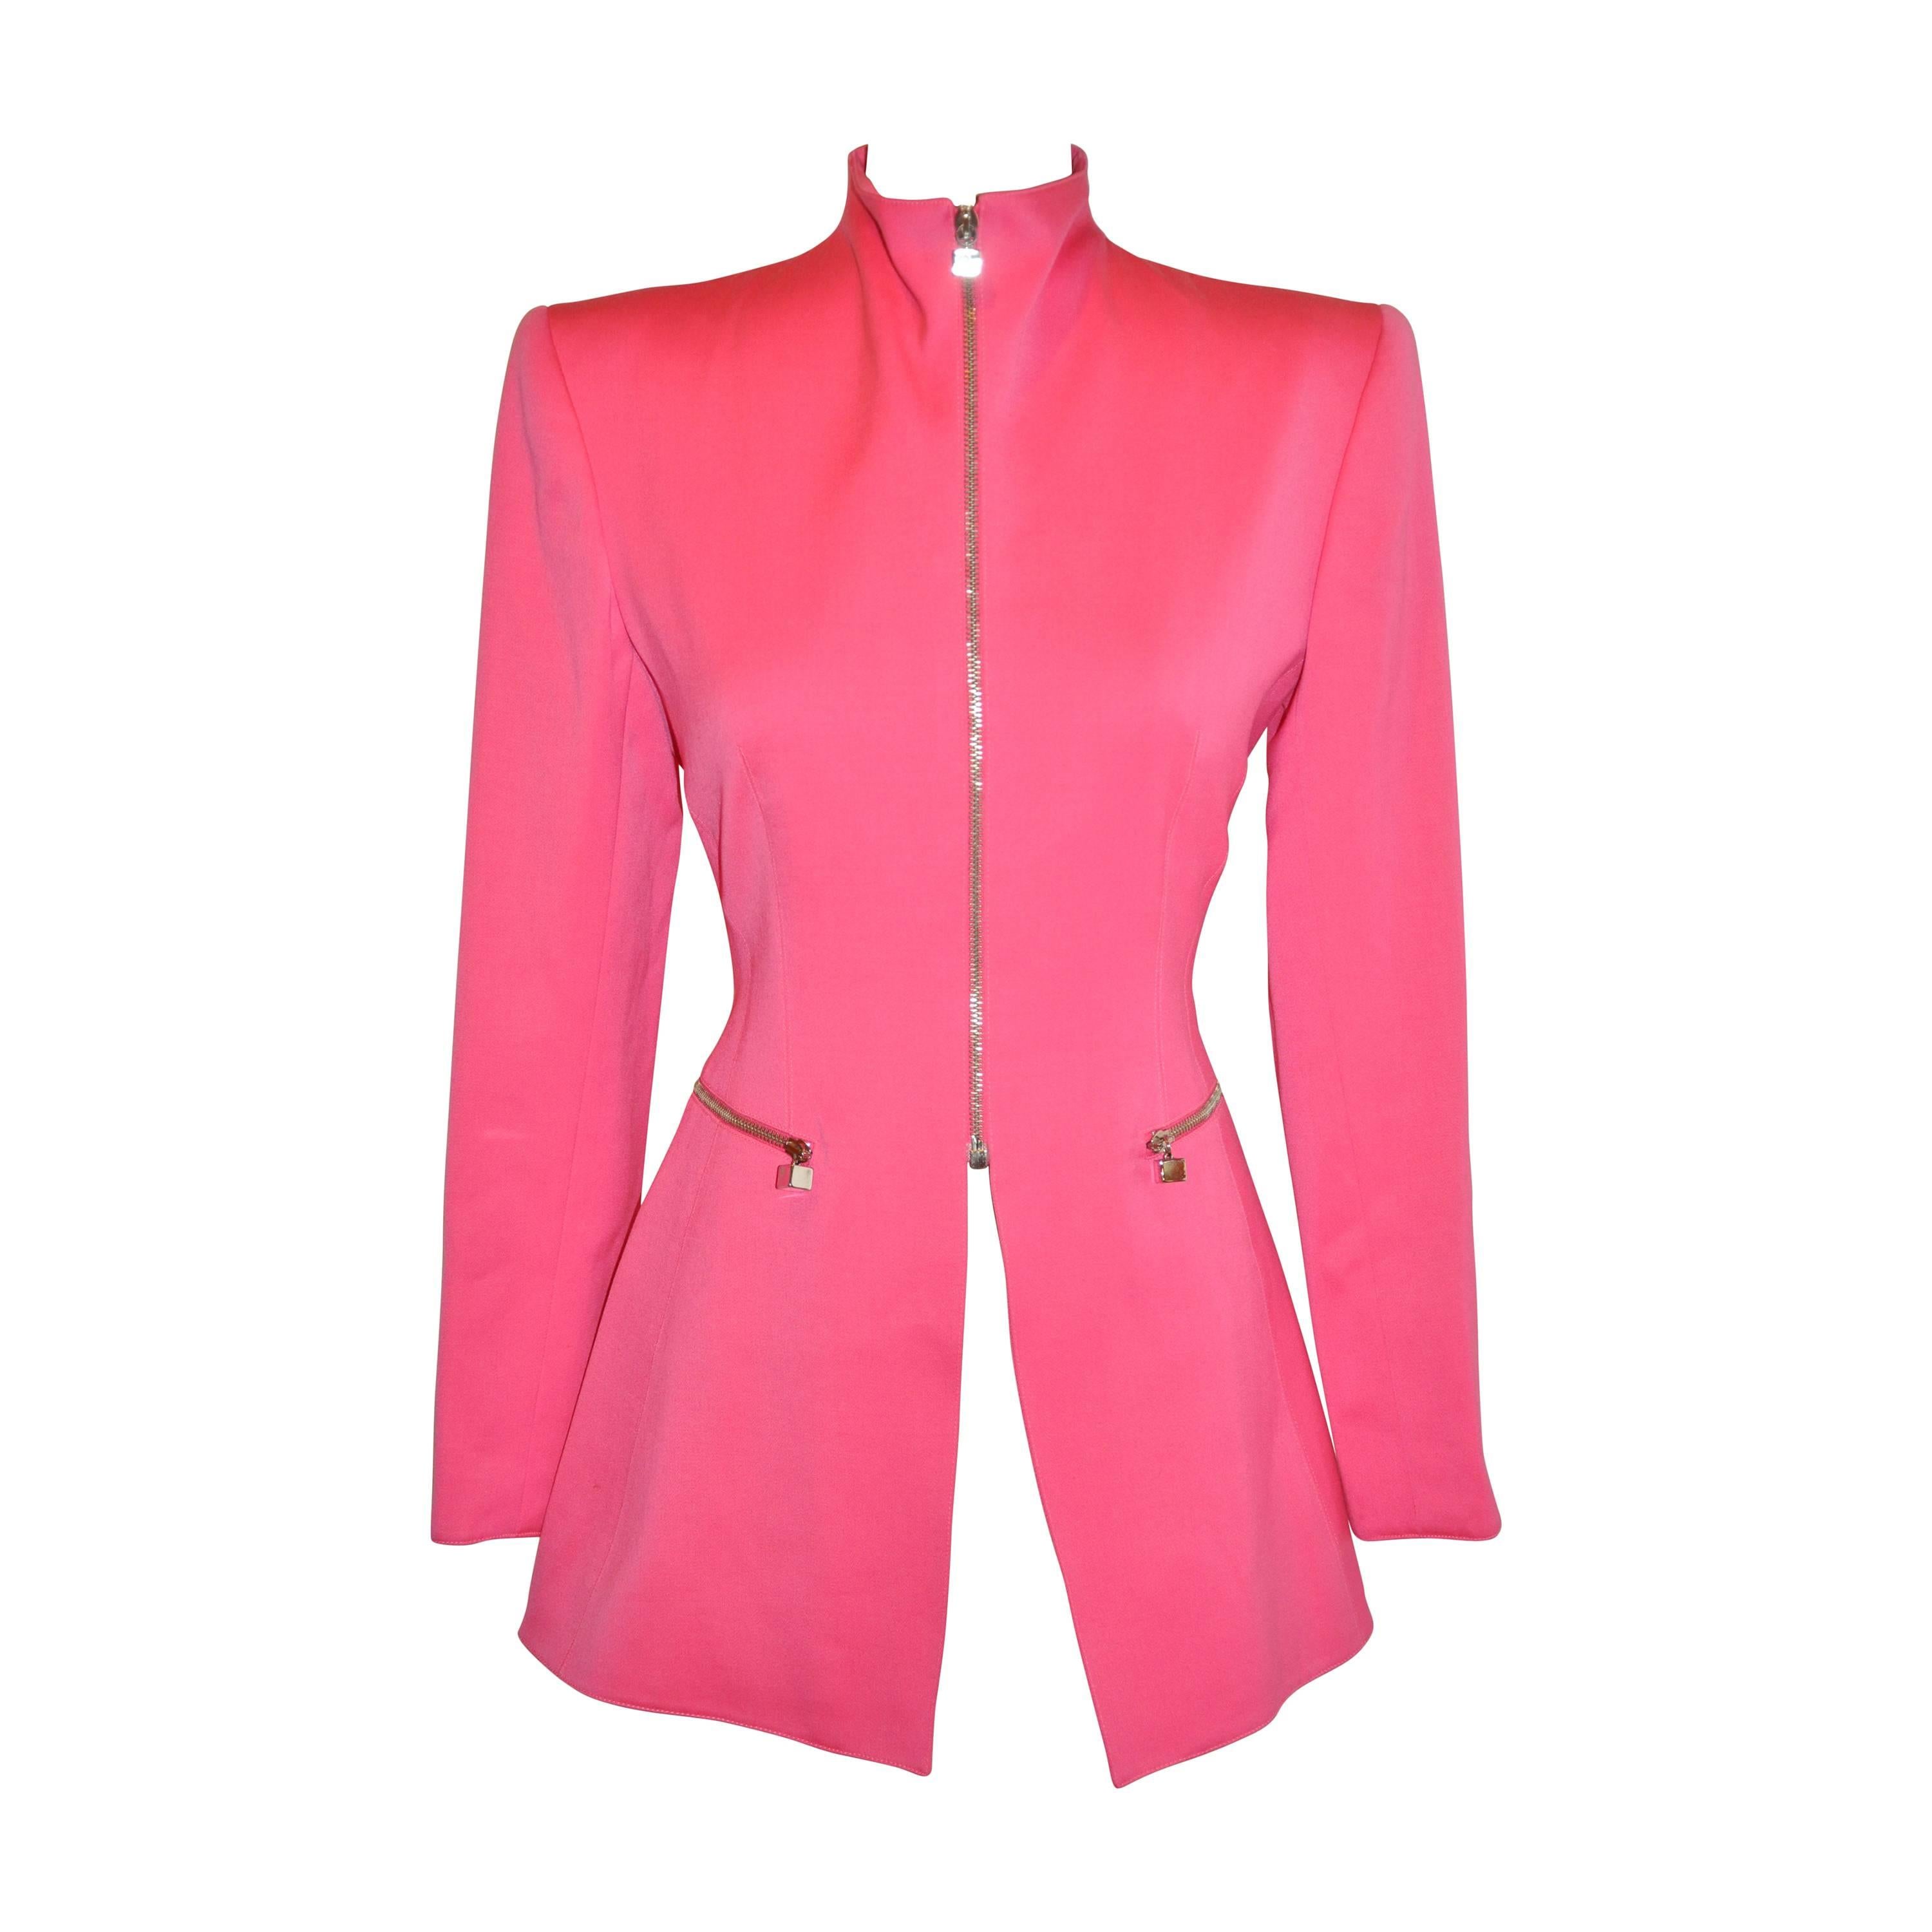 Claude Montana Bold Fuchsia Form-Fitting Zipper-Front Jacket For Sale